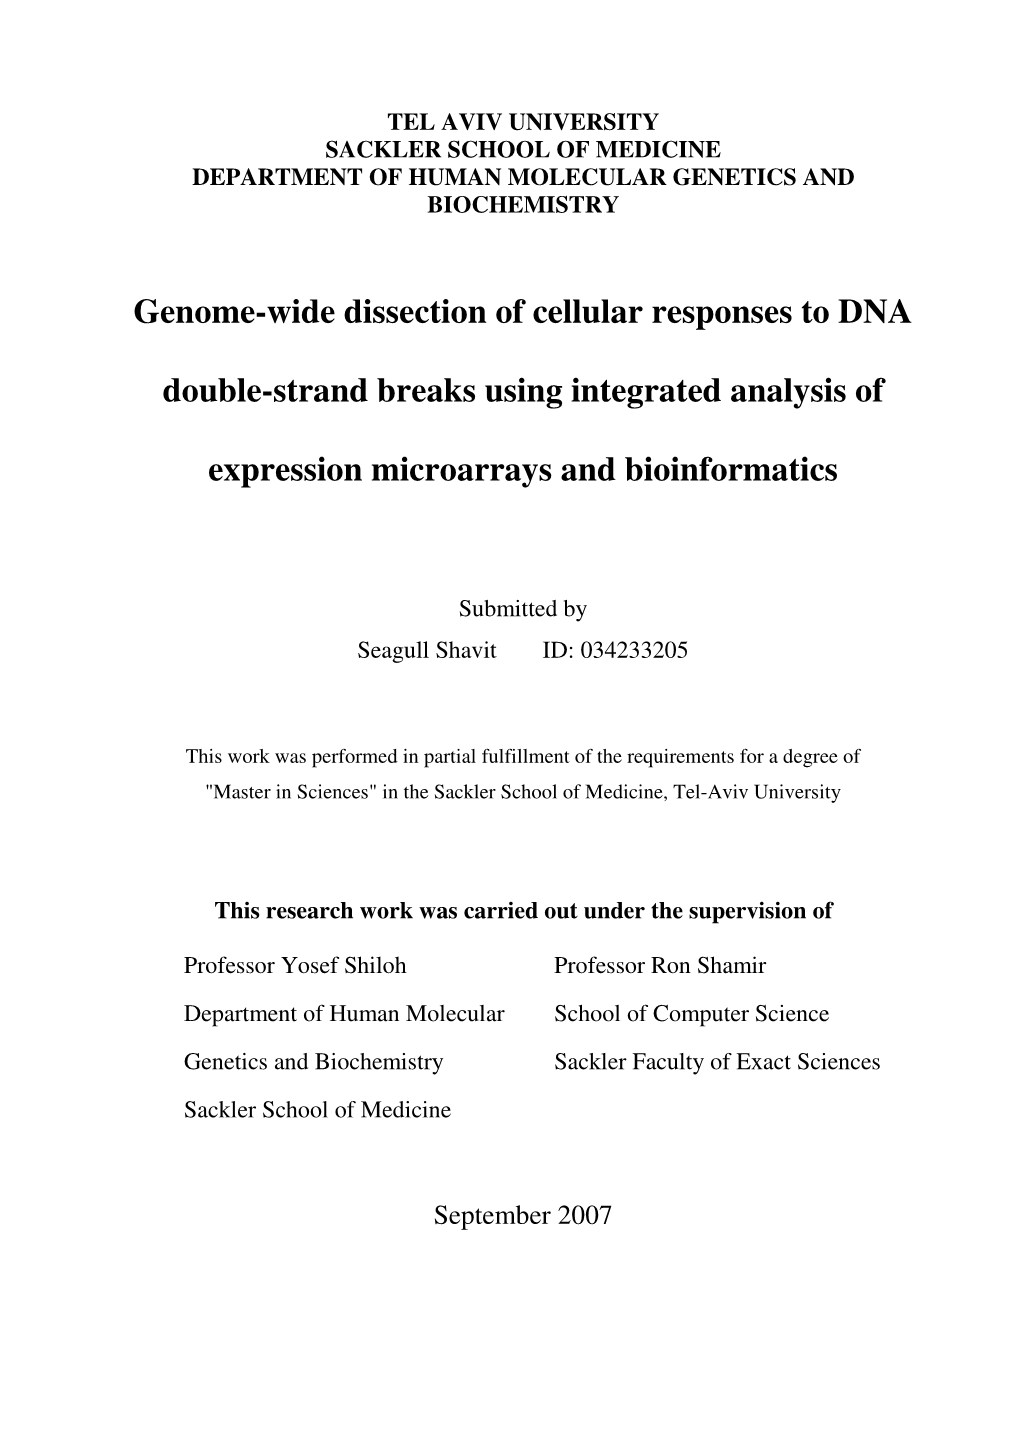 Genome-Wide Dissection of Cellular Responses to DNA Double-Strand